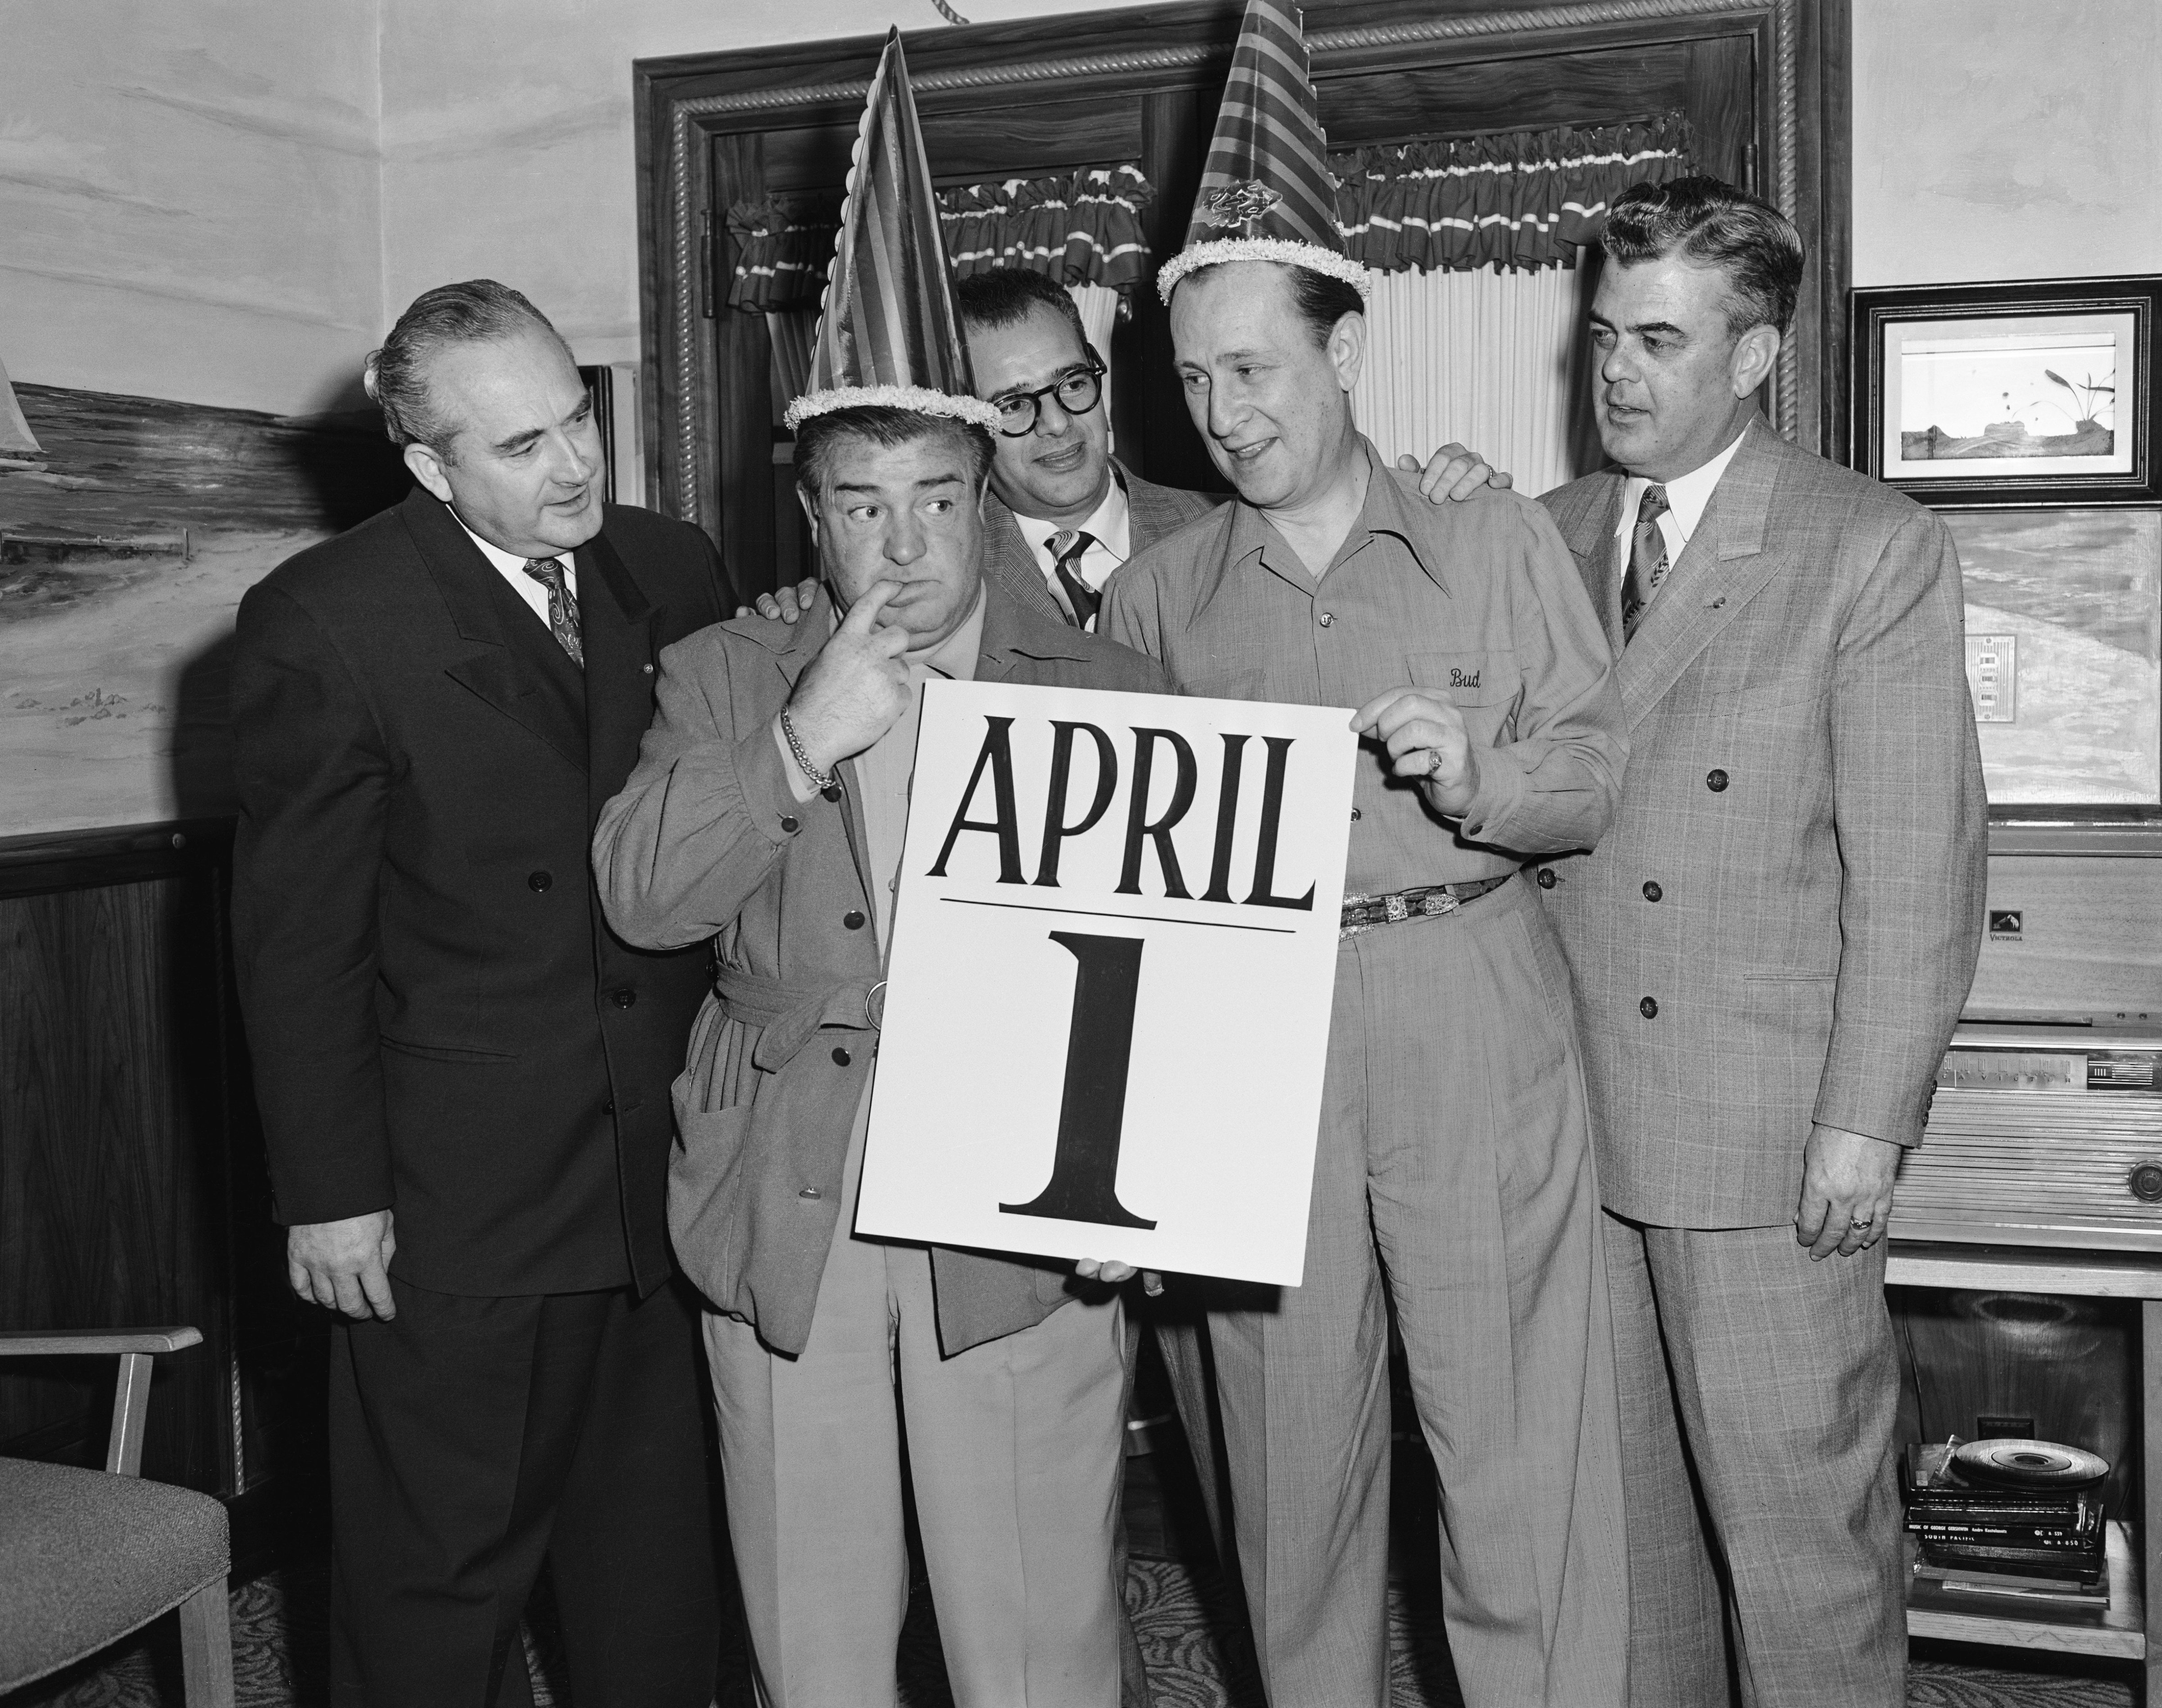 American comedians Bud Abbott (1897 - 1974) and Lou Costello (1906 - 1959) on April Fool's Day, early 1950s (Gene Lester&mdash;Getty Images)